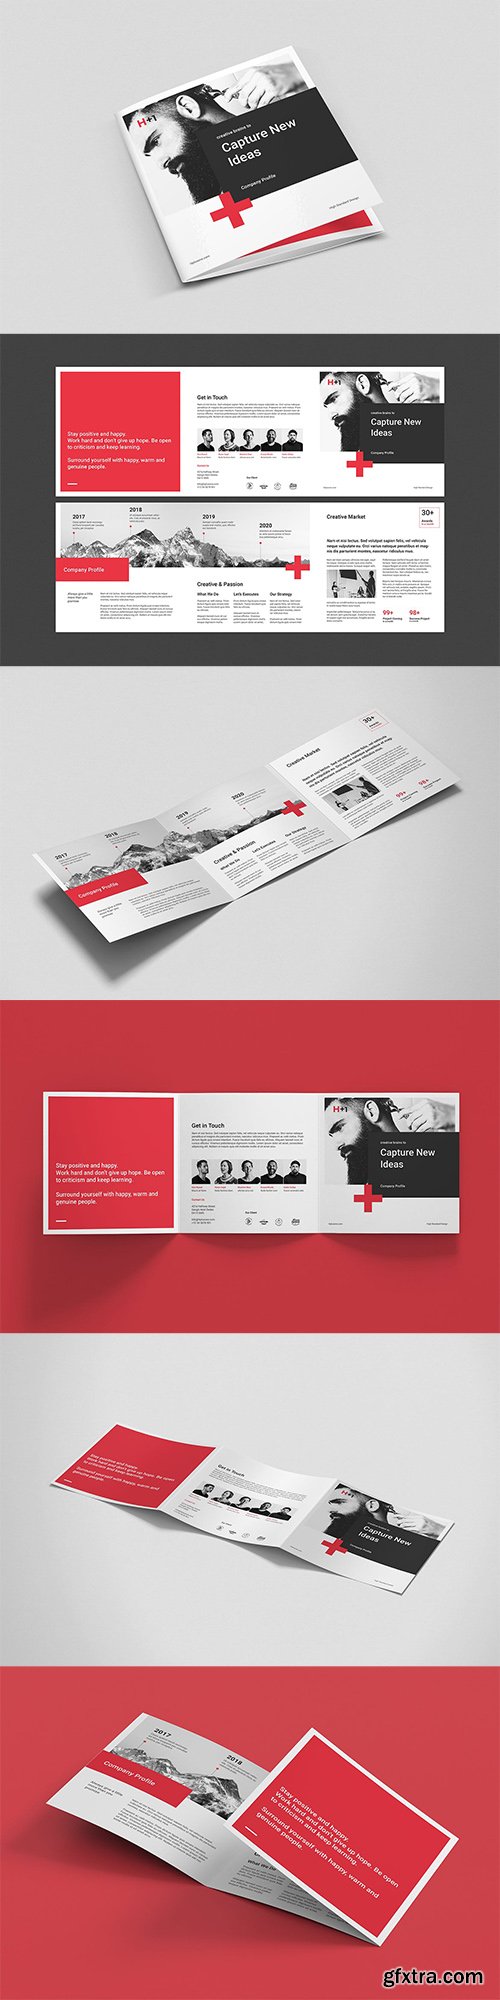 TriFold Business Square Brochure